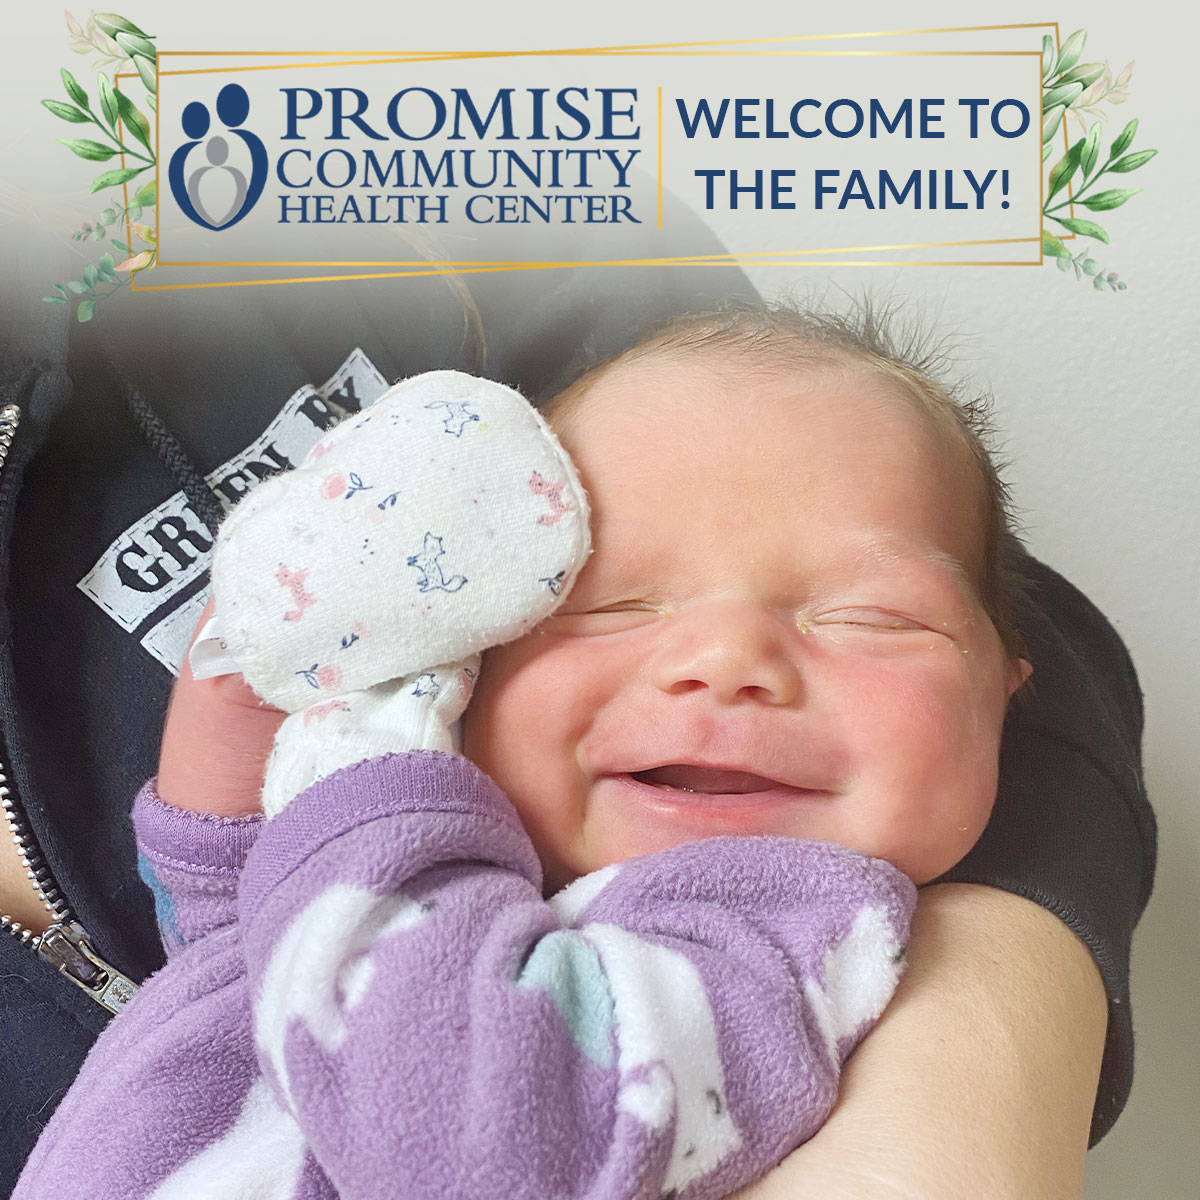 Stinger Family home birth in Sioux Falls, SD | Promise Community Health Center in Sioux Center, Iowa | Home births in northwest Iowa, Home births in southeast South Dakota, Home births in southwest Minnesota | Home births in Sioux Falls South Dakota, Home births in Beresford South Dakota, Home births in Sioux City IA, Home births in LeMars IA, Home births in Worthington MN, Home births in Iowa, Home births in South Dakota, Home births in Minnesota